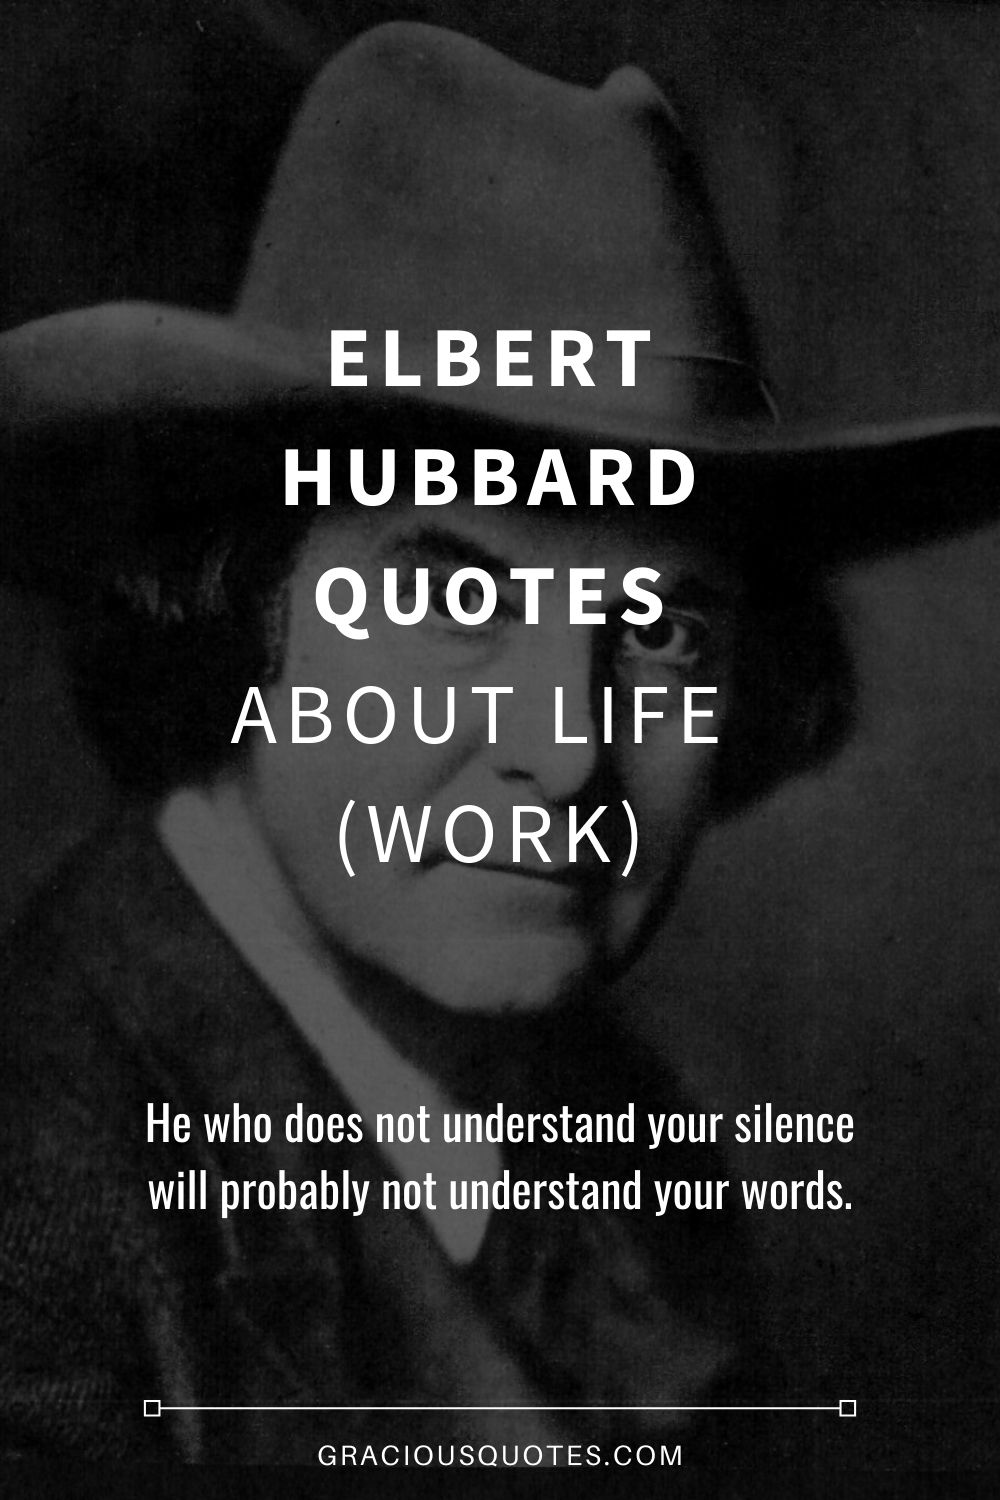 Elbert Hubbard Quotes About Life (WORK) - Gracious Quotes